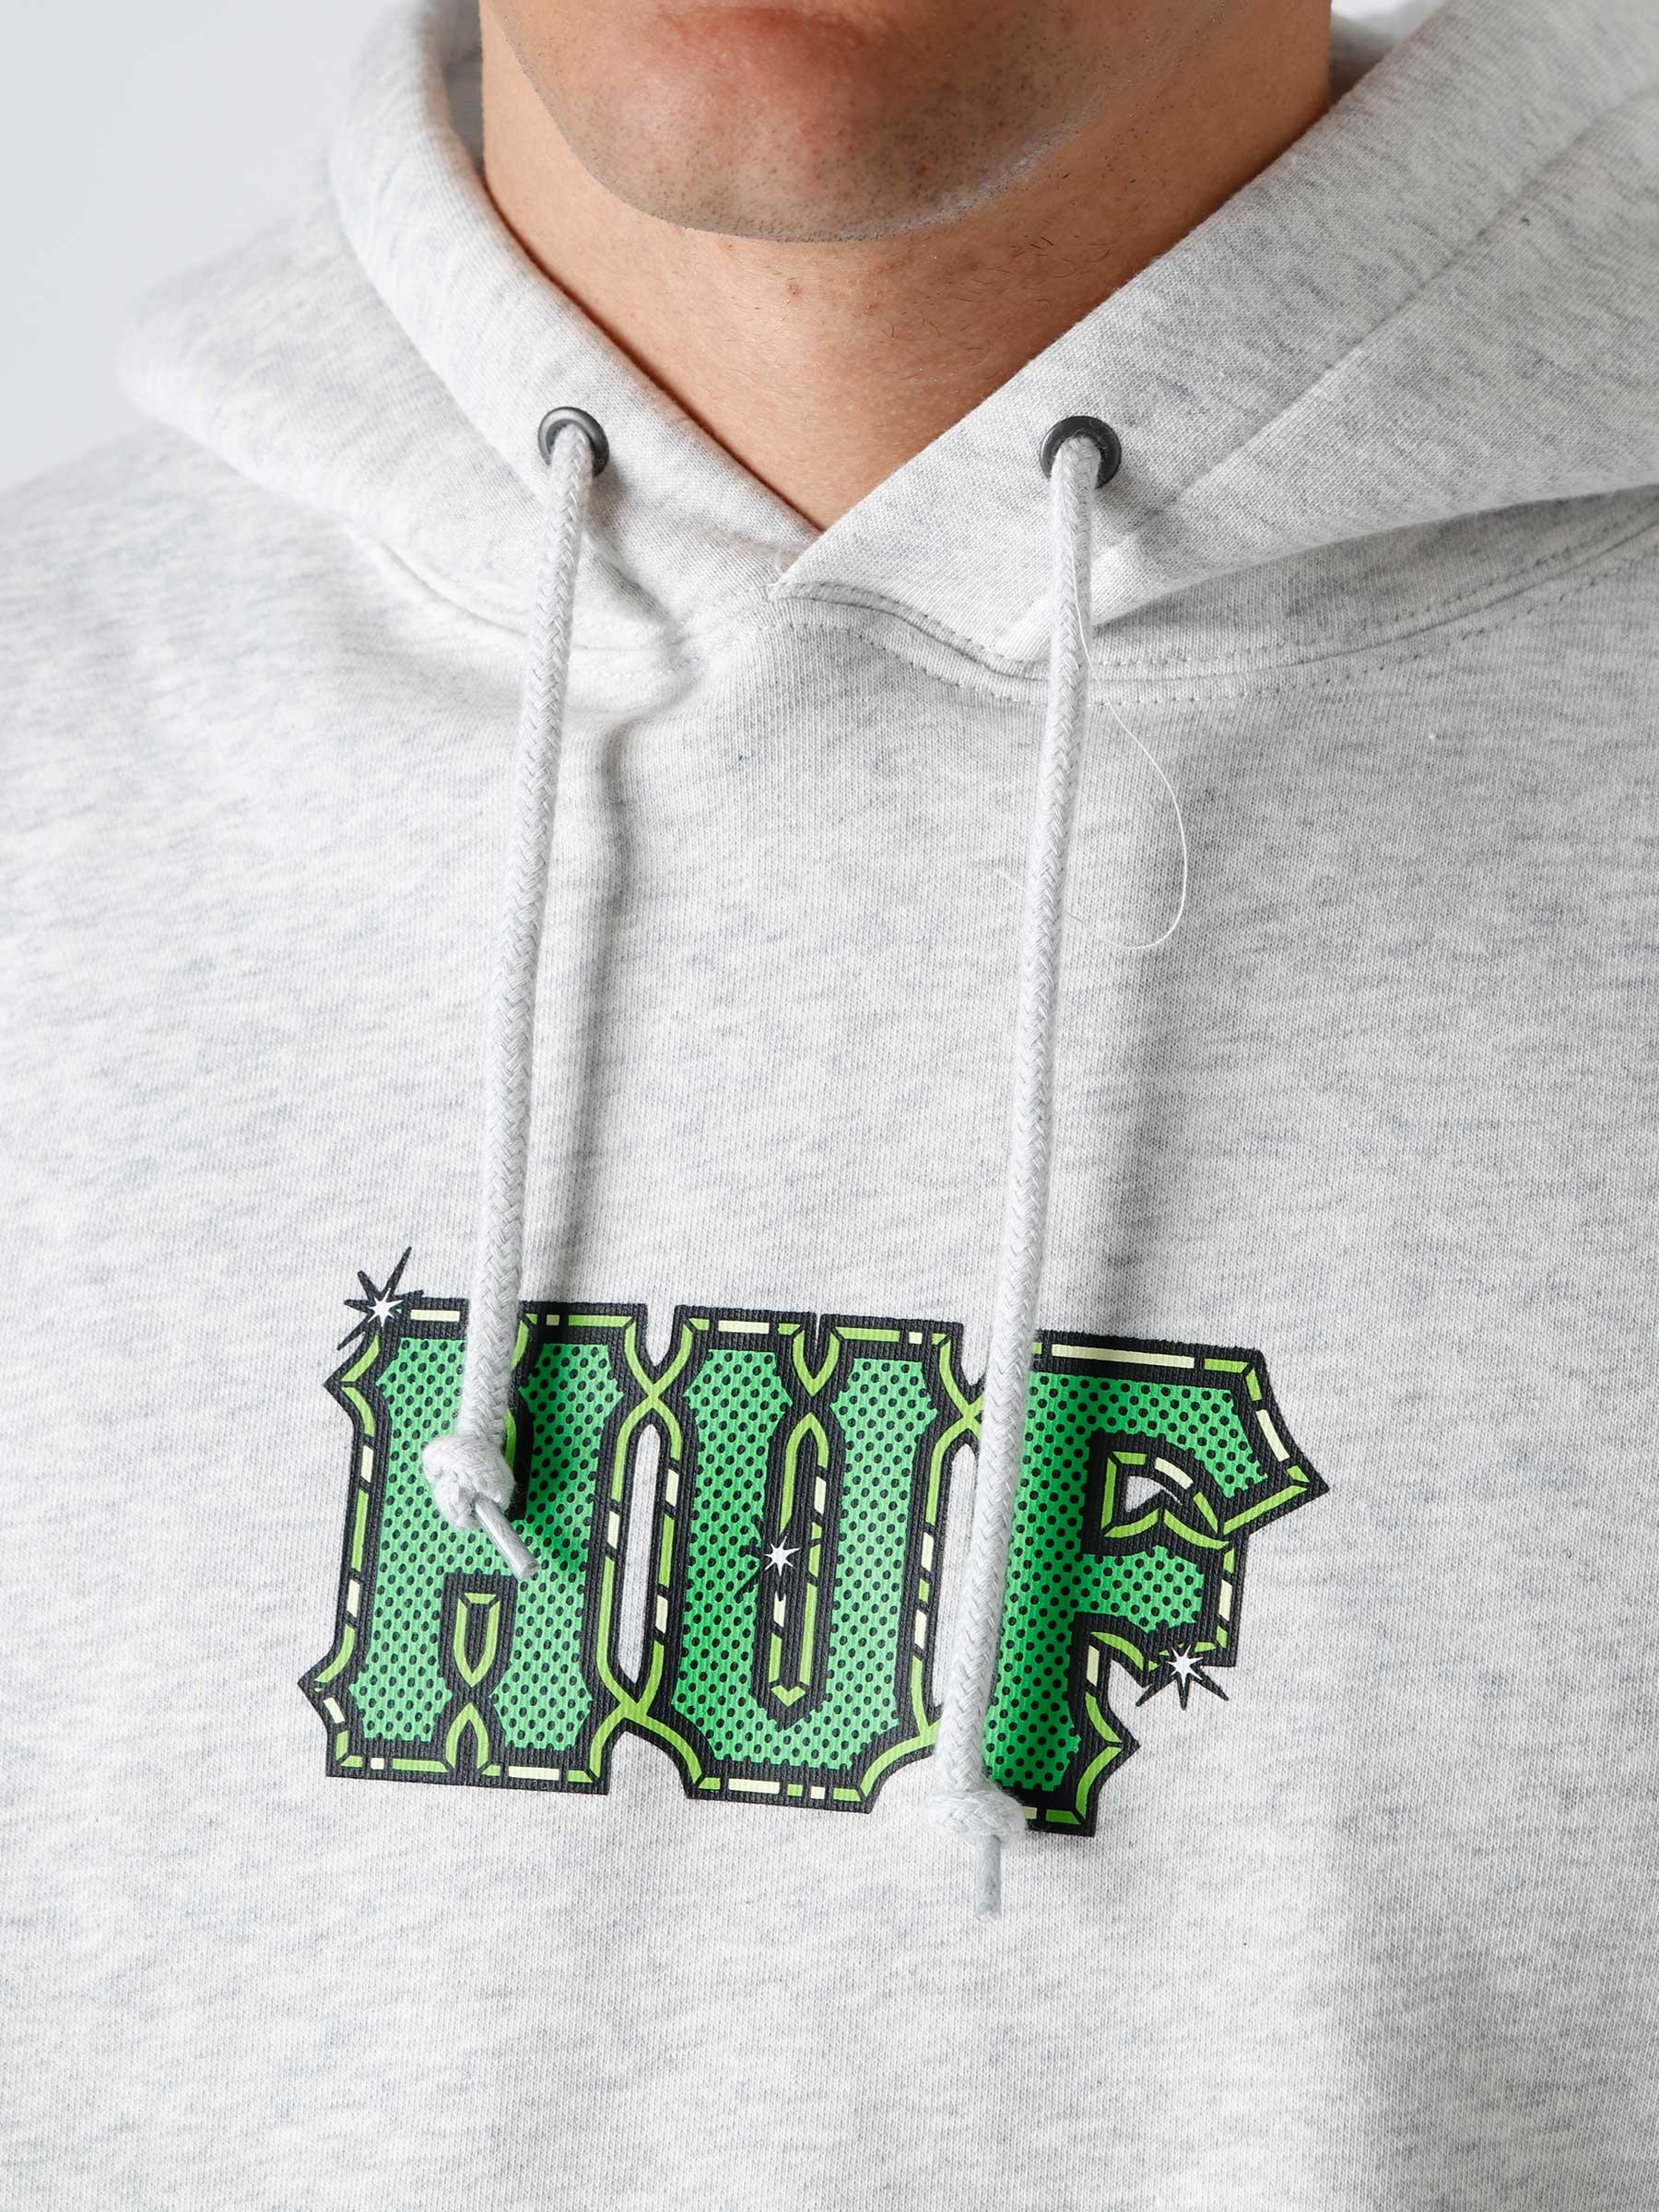 Amazing H Pullover Hoodie Athletic Heather PF00457